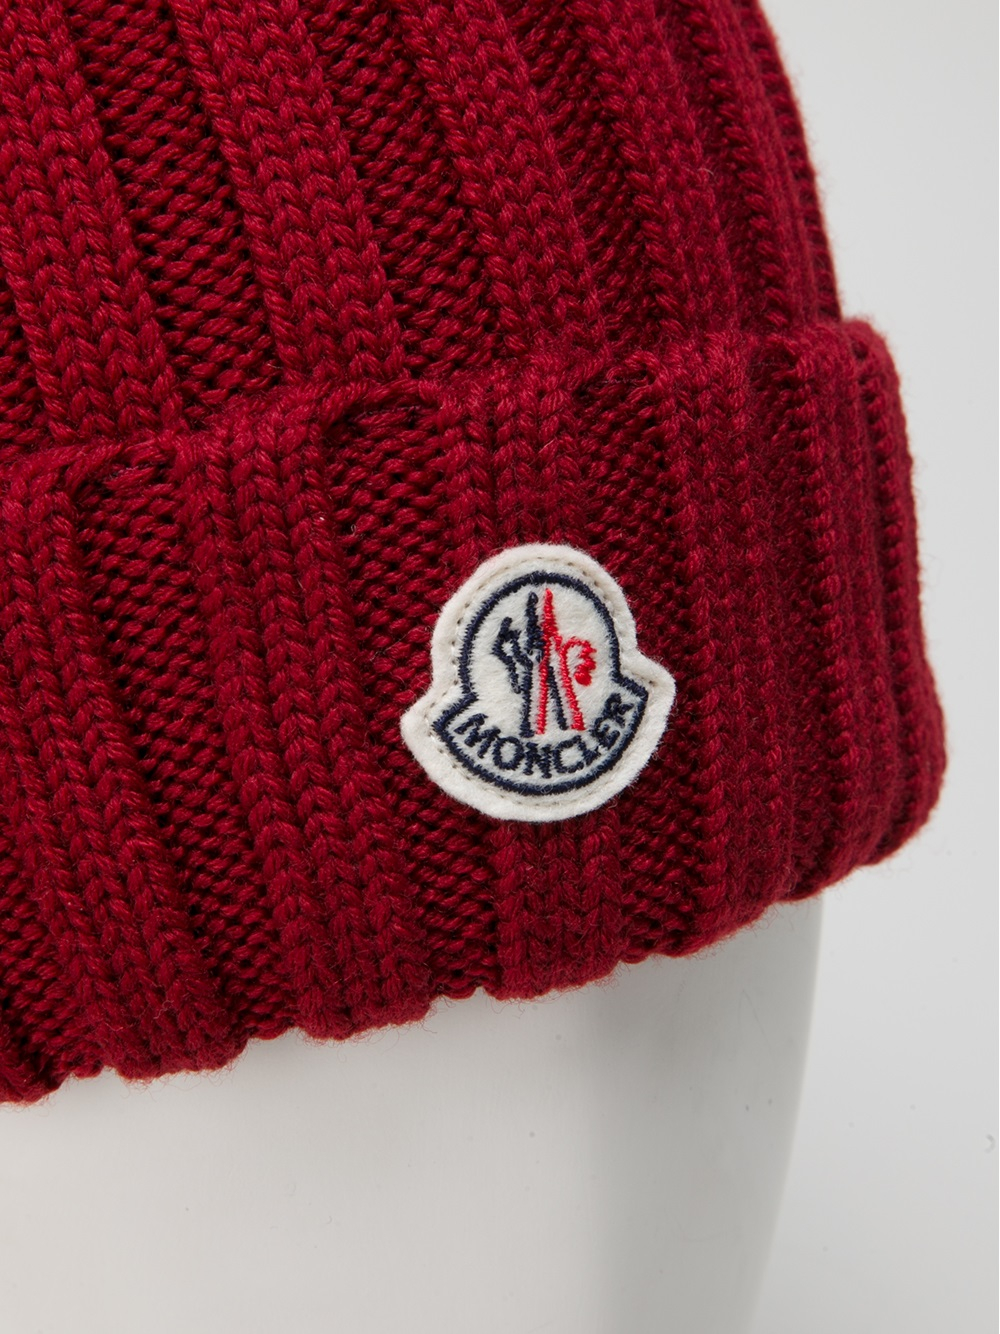 Moncler Wool Ribbed Knit Beanie in Red for Men - Lyst